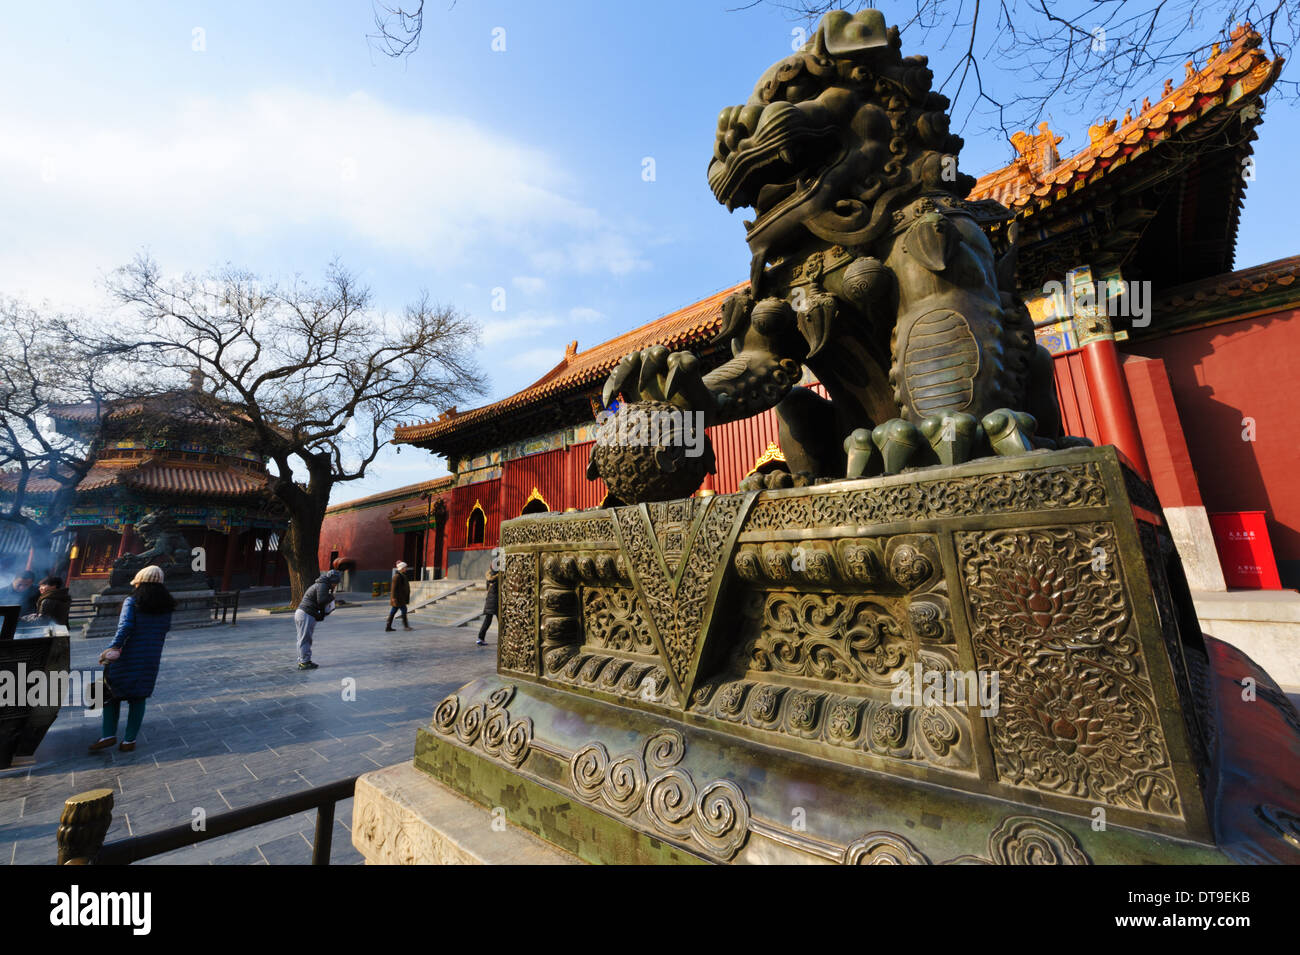 The Lama Temple Yonghe Gong) in Beijing, China Stock Photo